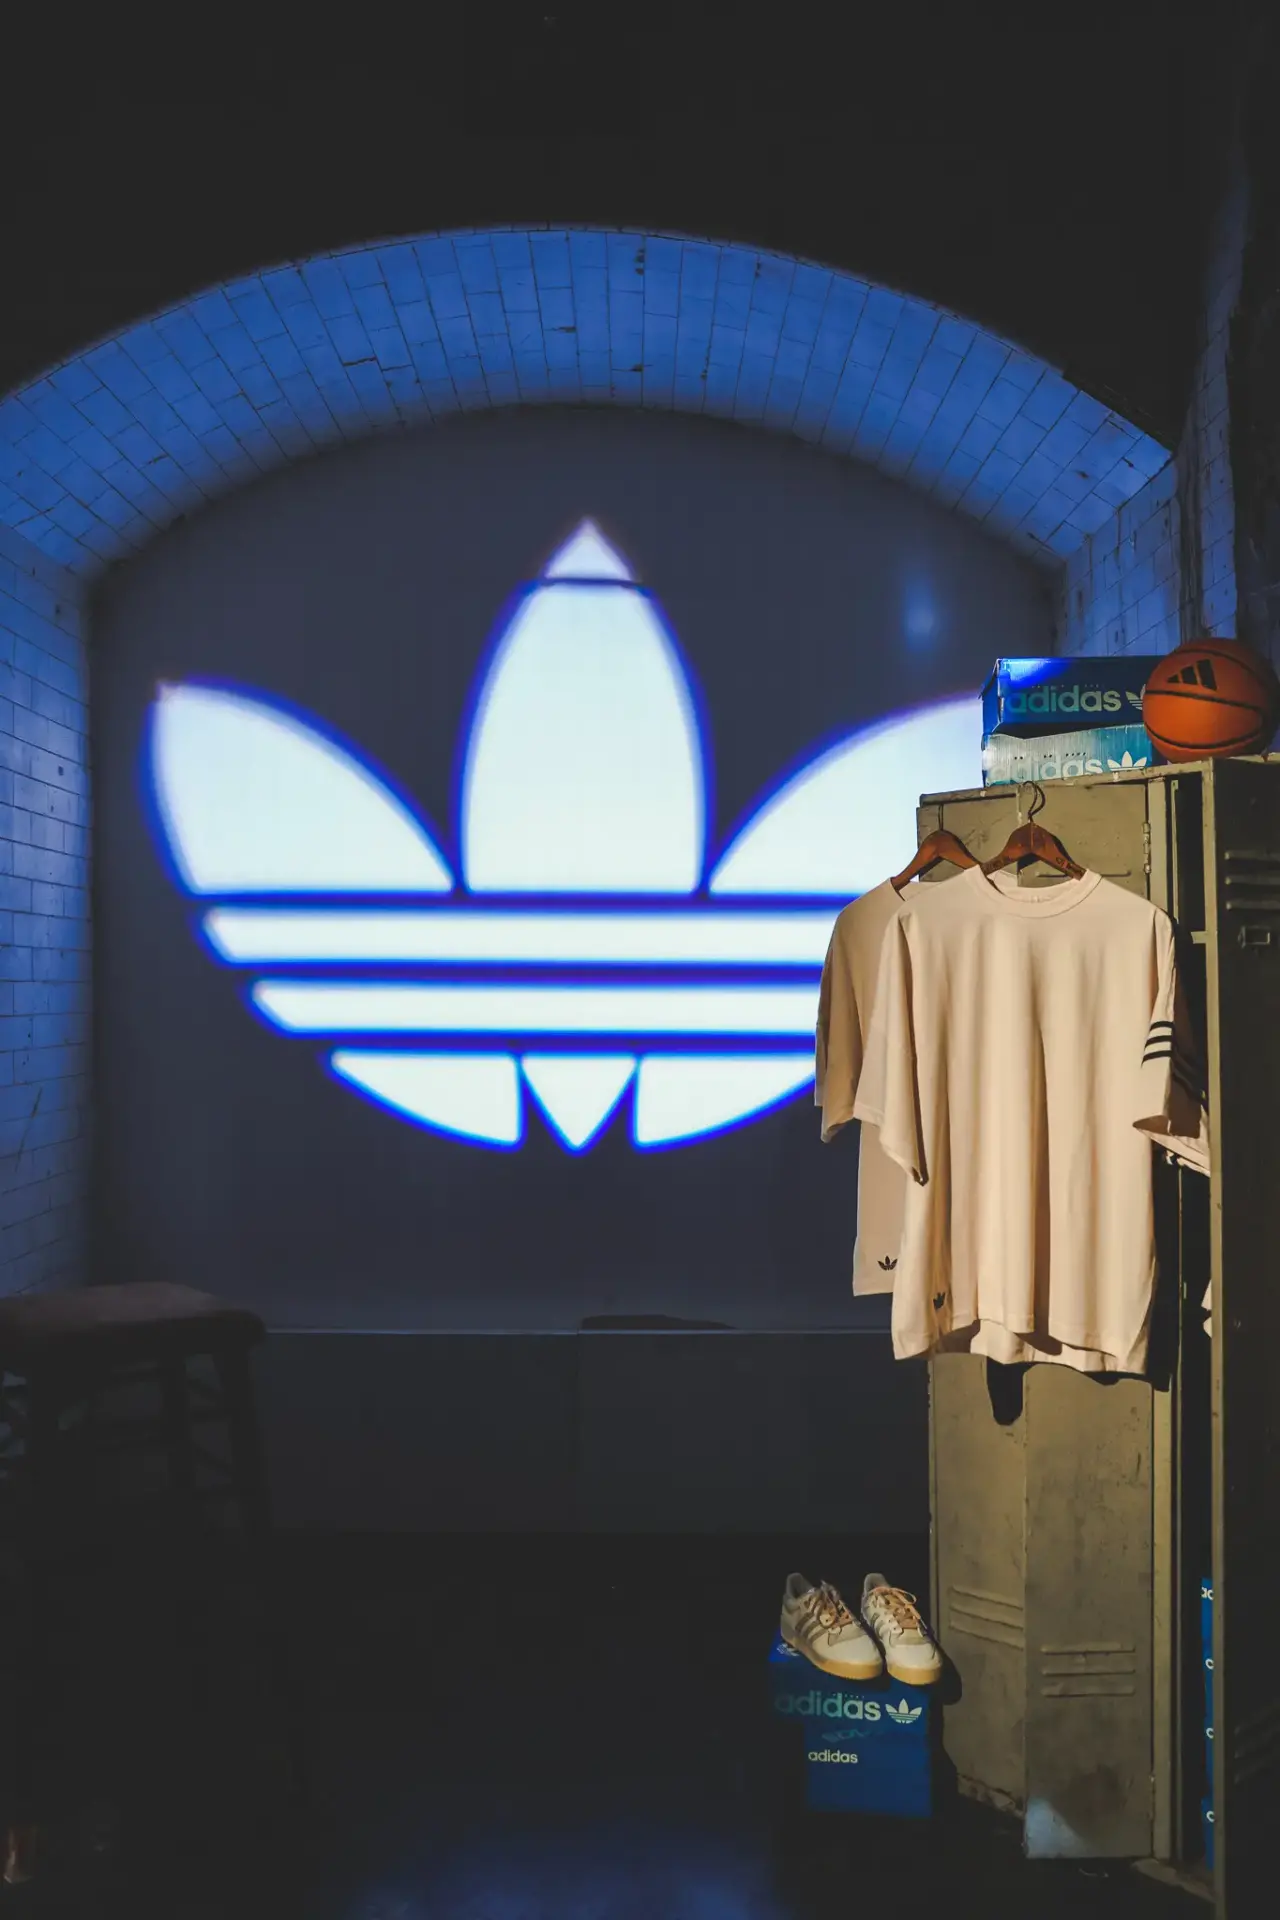 adidas clothing in a staged locker-room with a big logo projected on the back wall